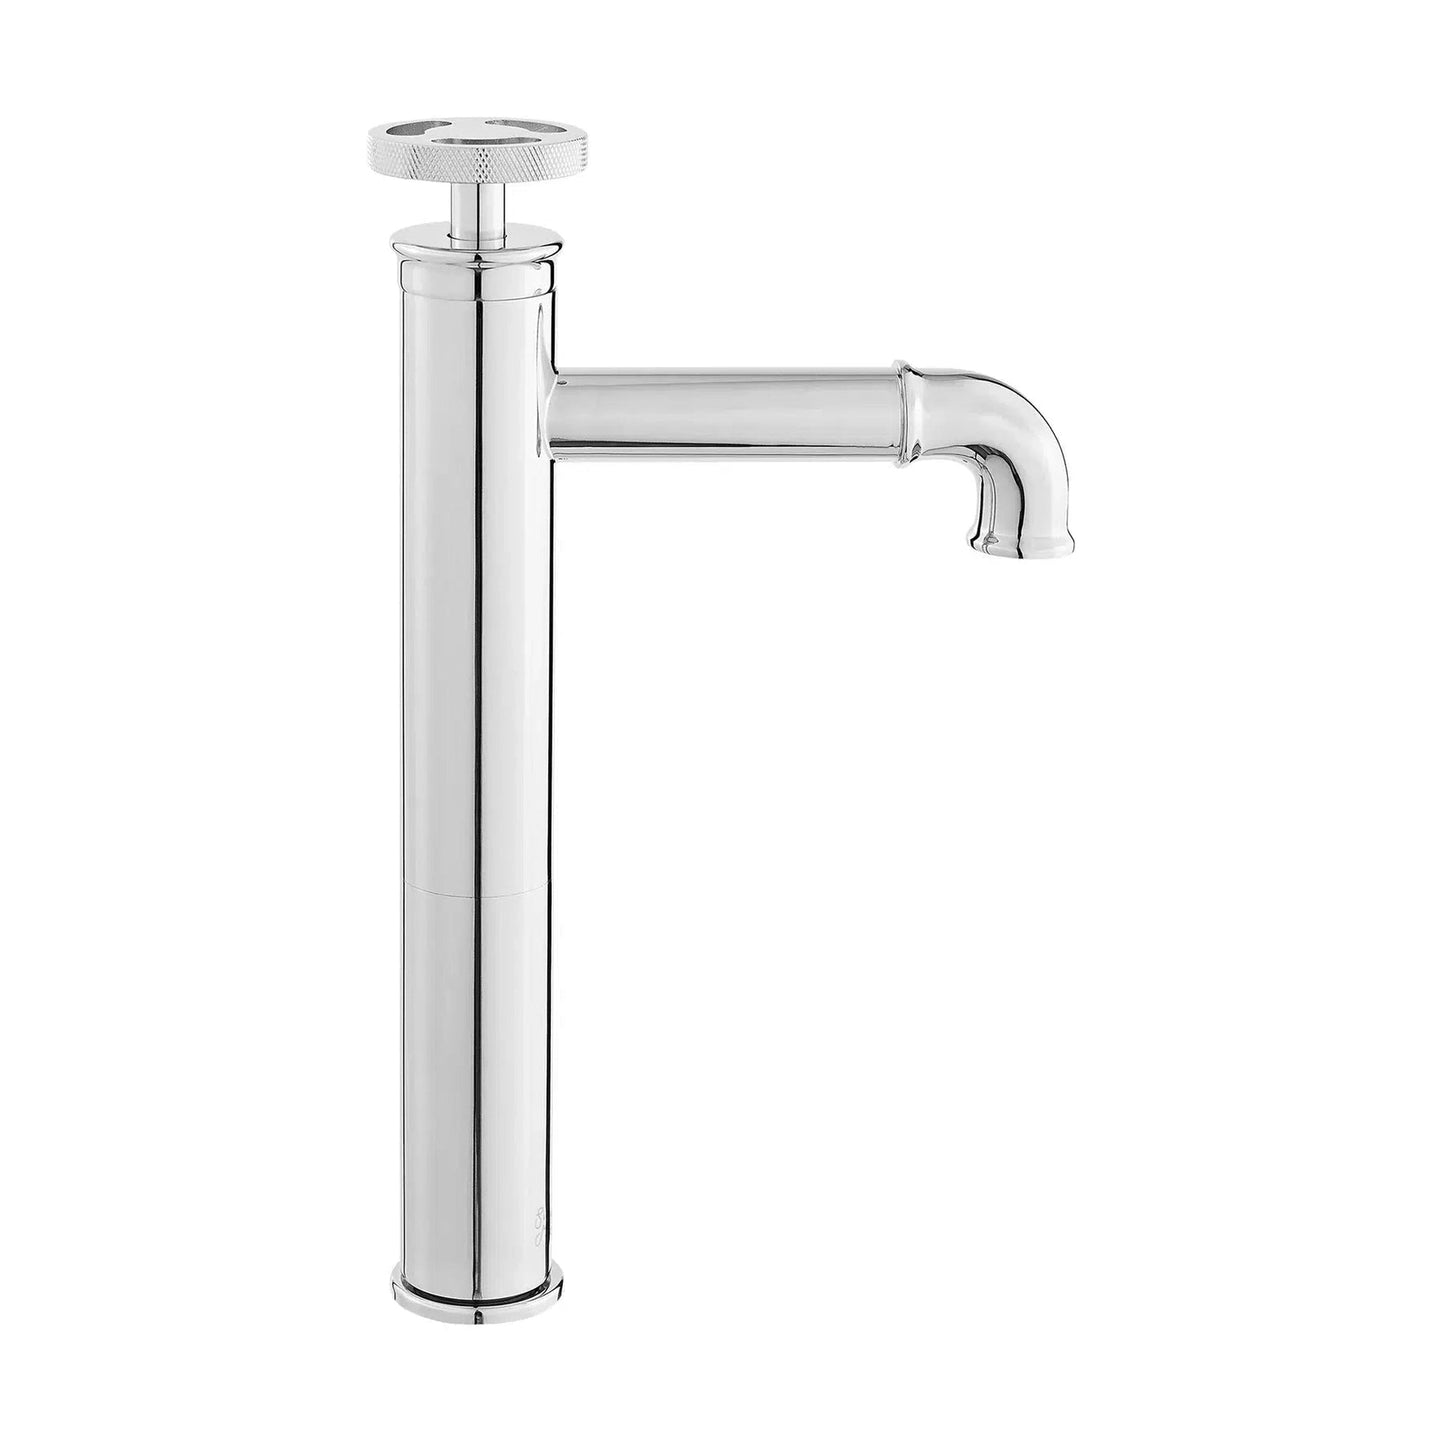 Swiss Madison Avallon 12" Single-Handle Chrome Bathroom Faucet With 1.2 GPM Flow Rate